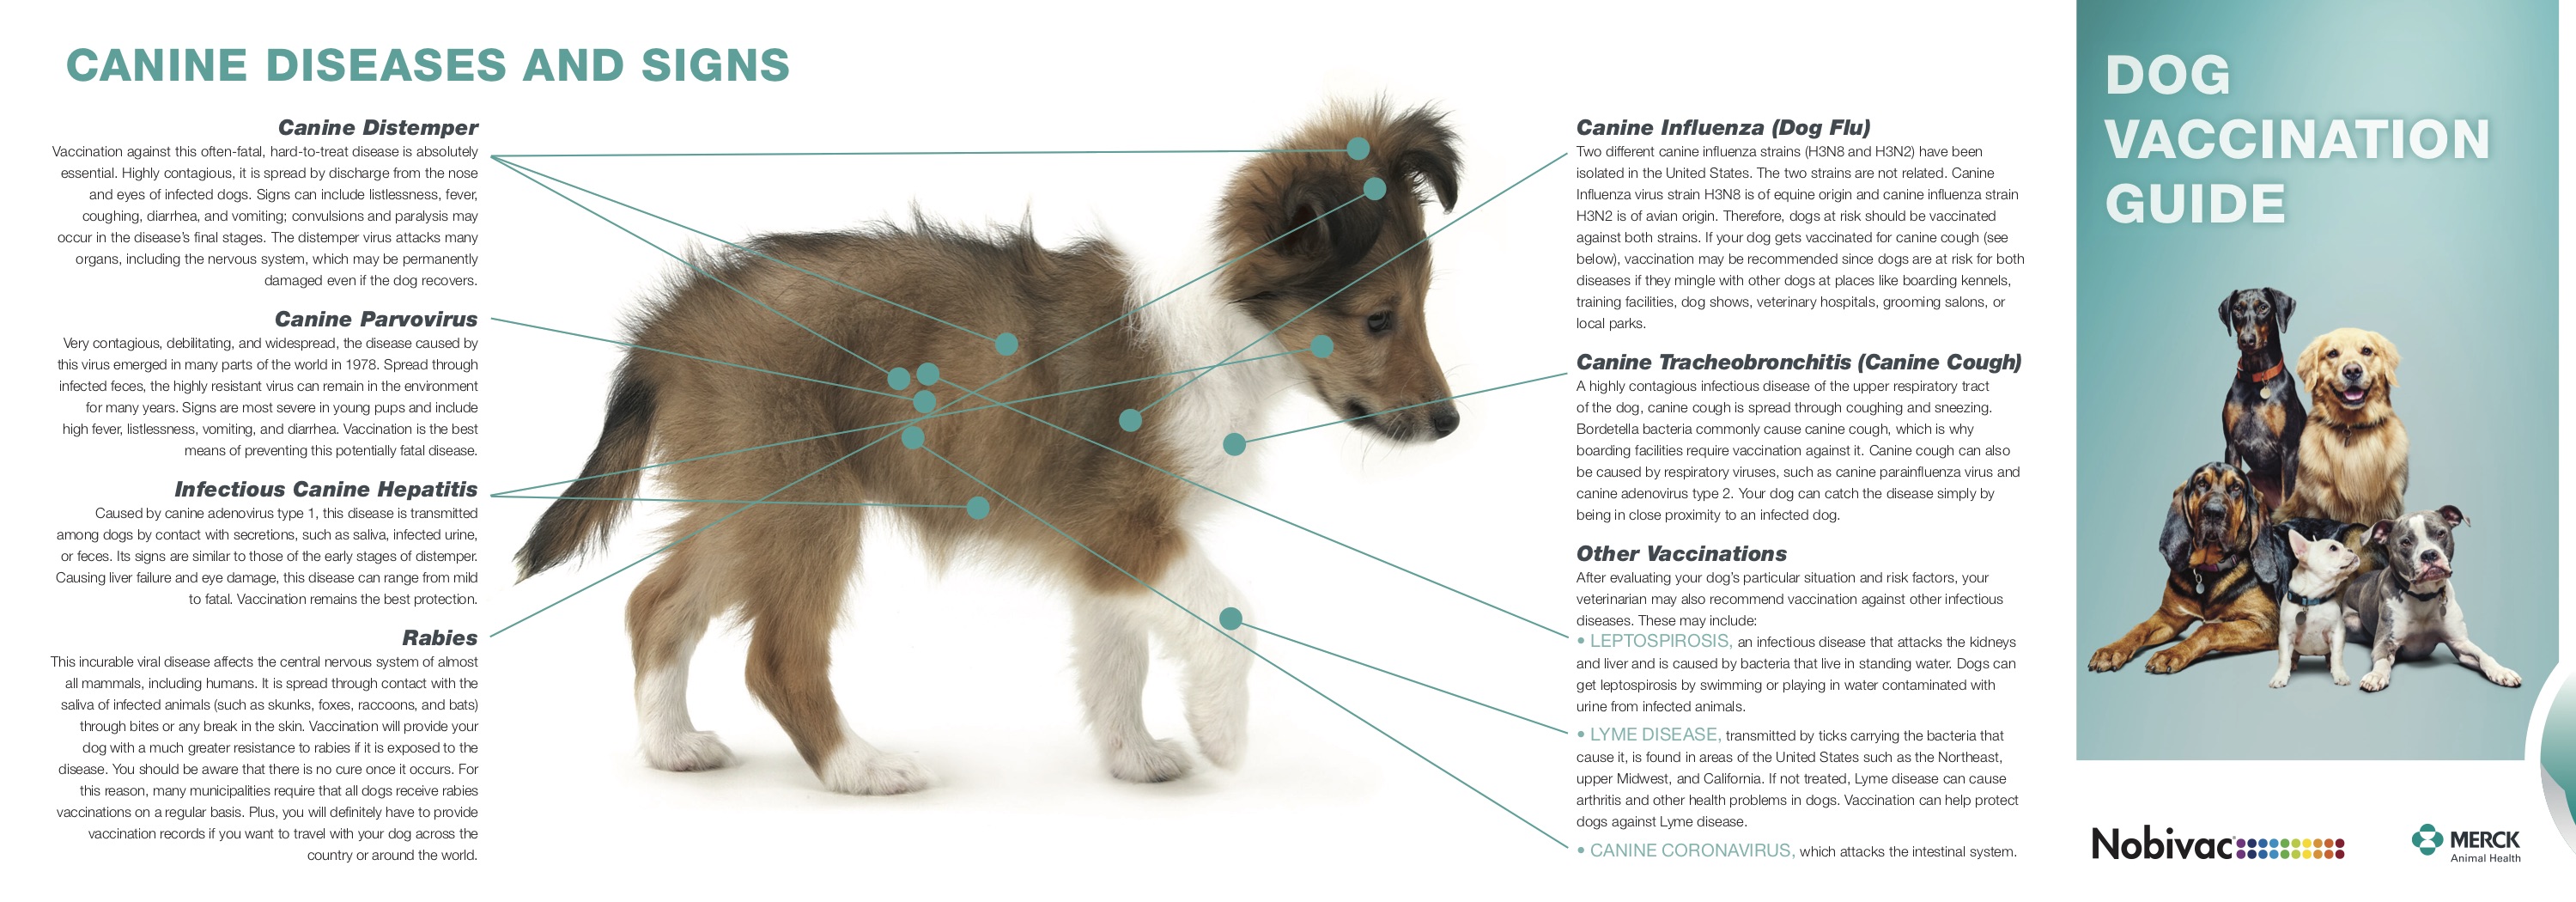 Canine Vaccine Guide